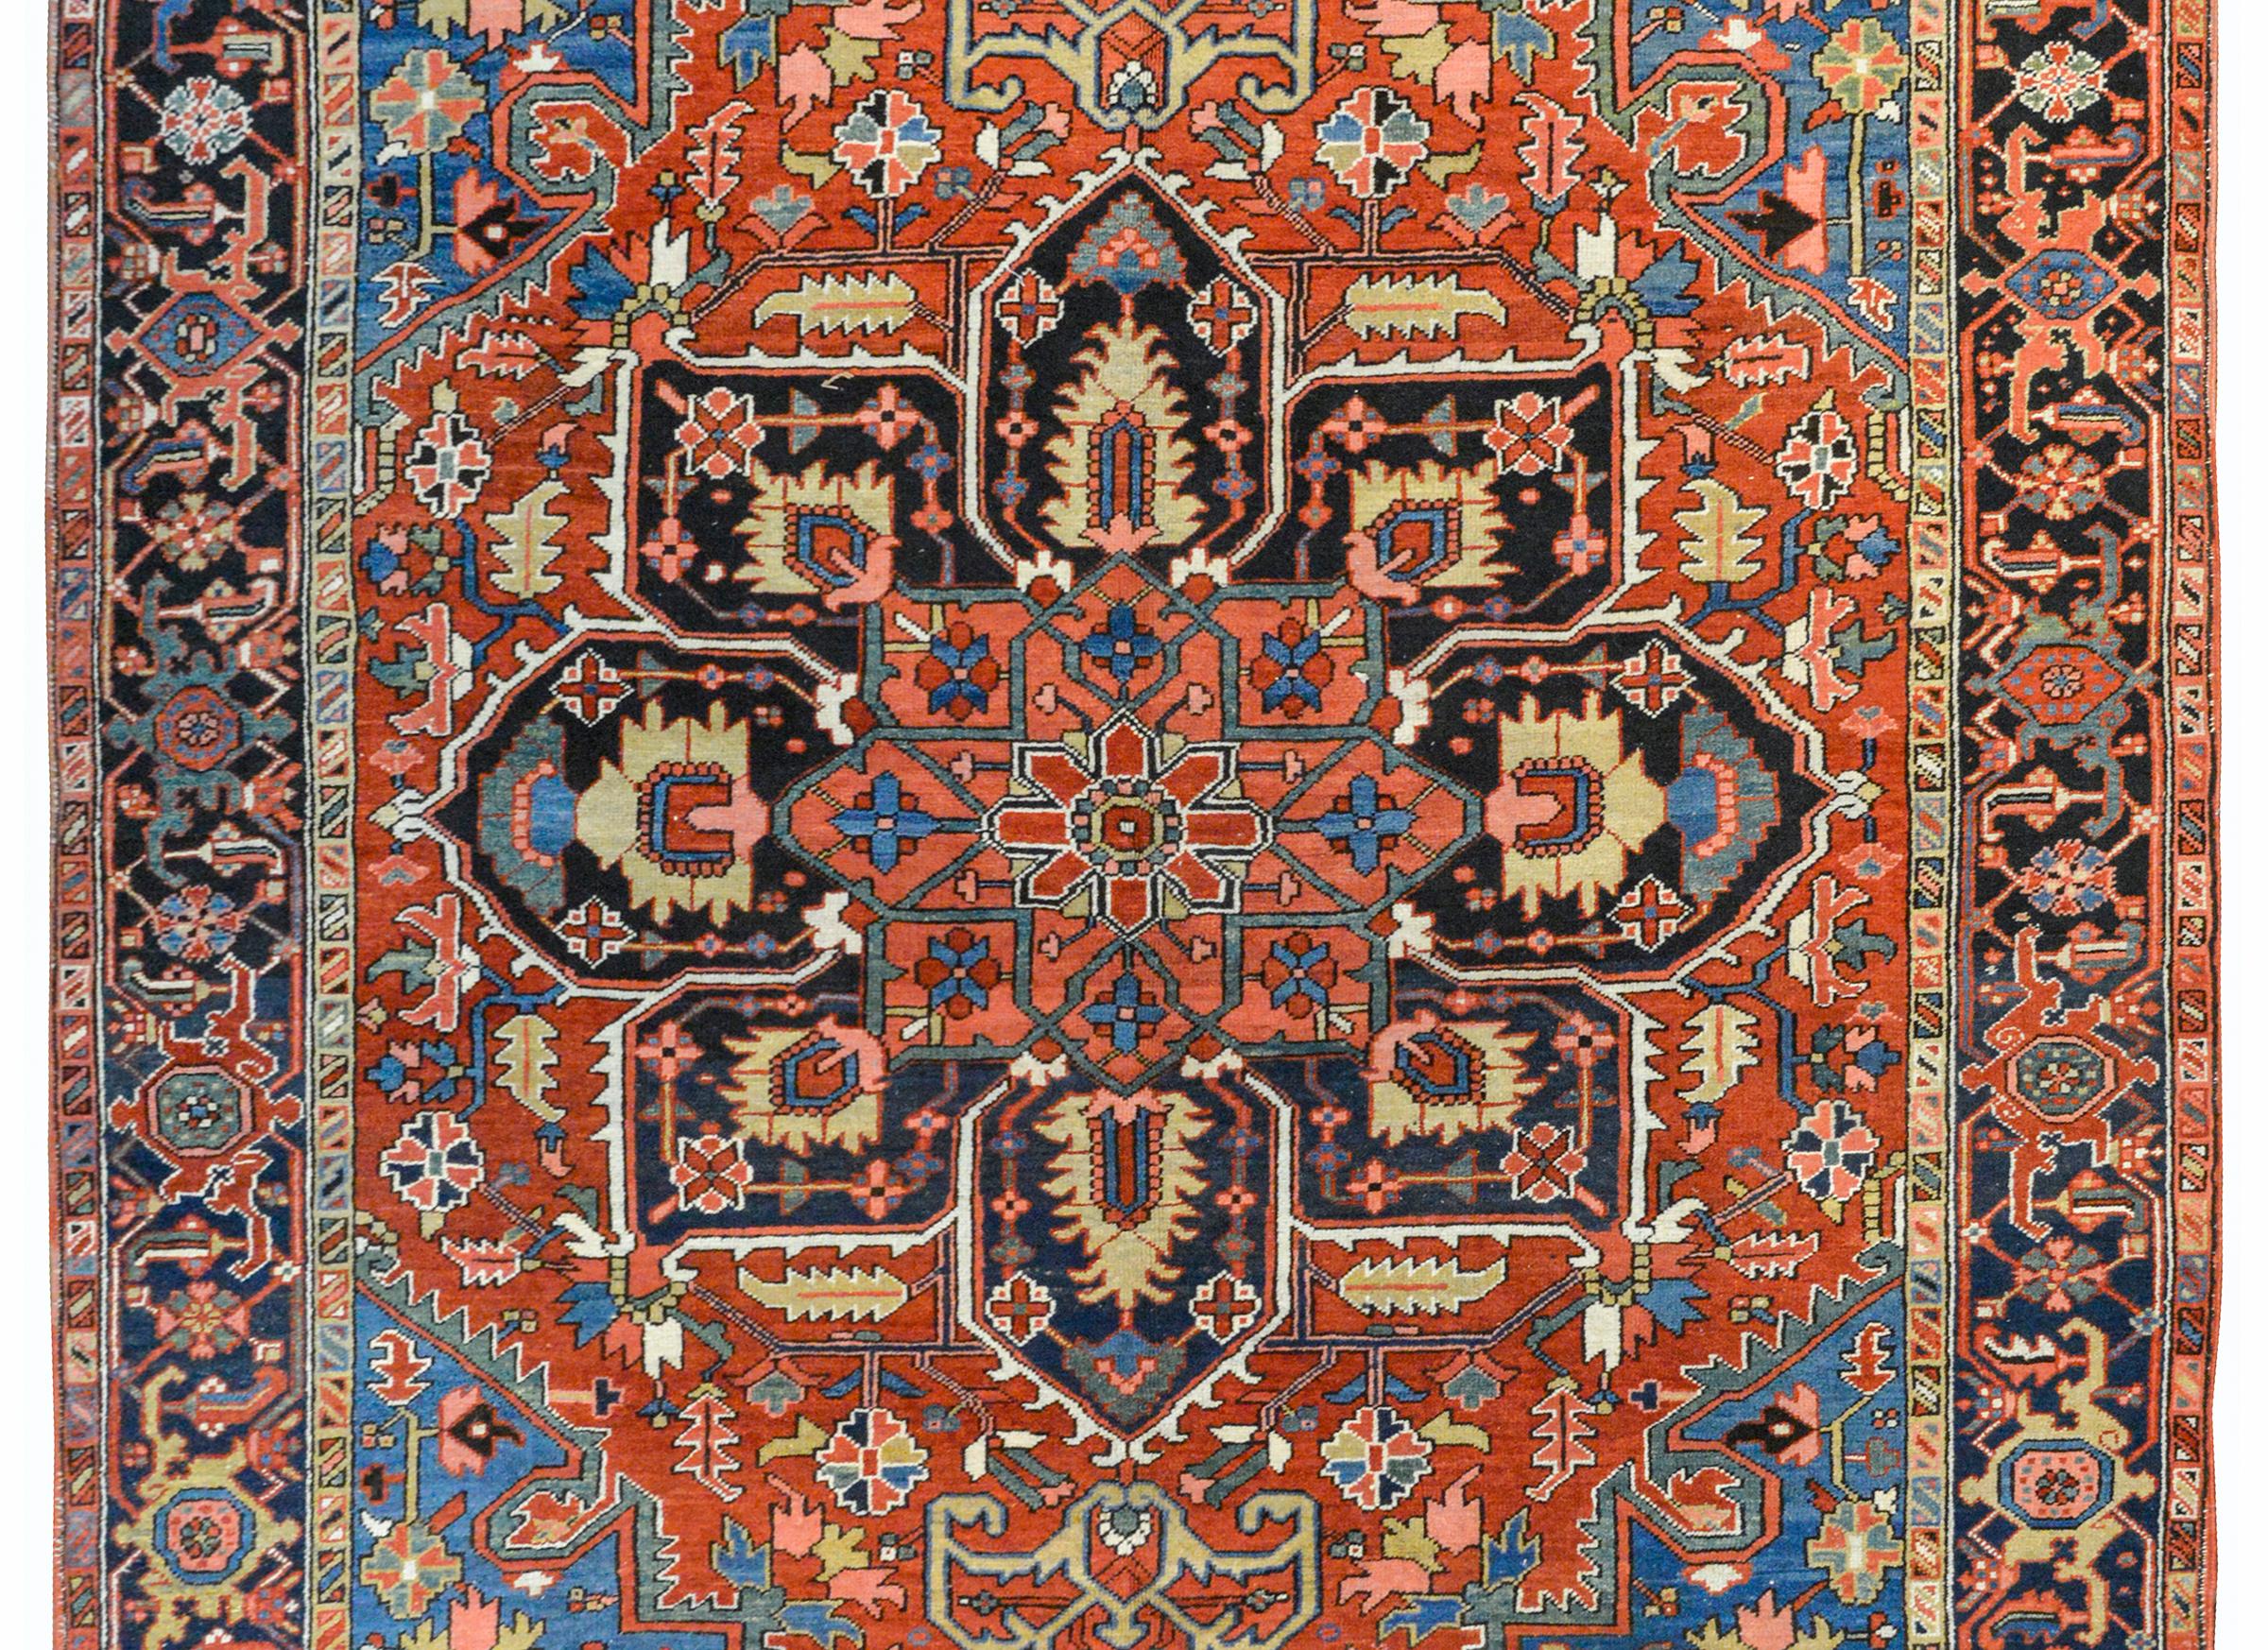 A wonderful early 20th century Persian Heriz rug with a rather large central floral medallion woven with more flowers and vines and woven in crimson, salmon, green, gold, indigo and black wool against a field of even more flowers and leaves, and